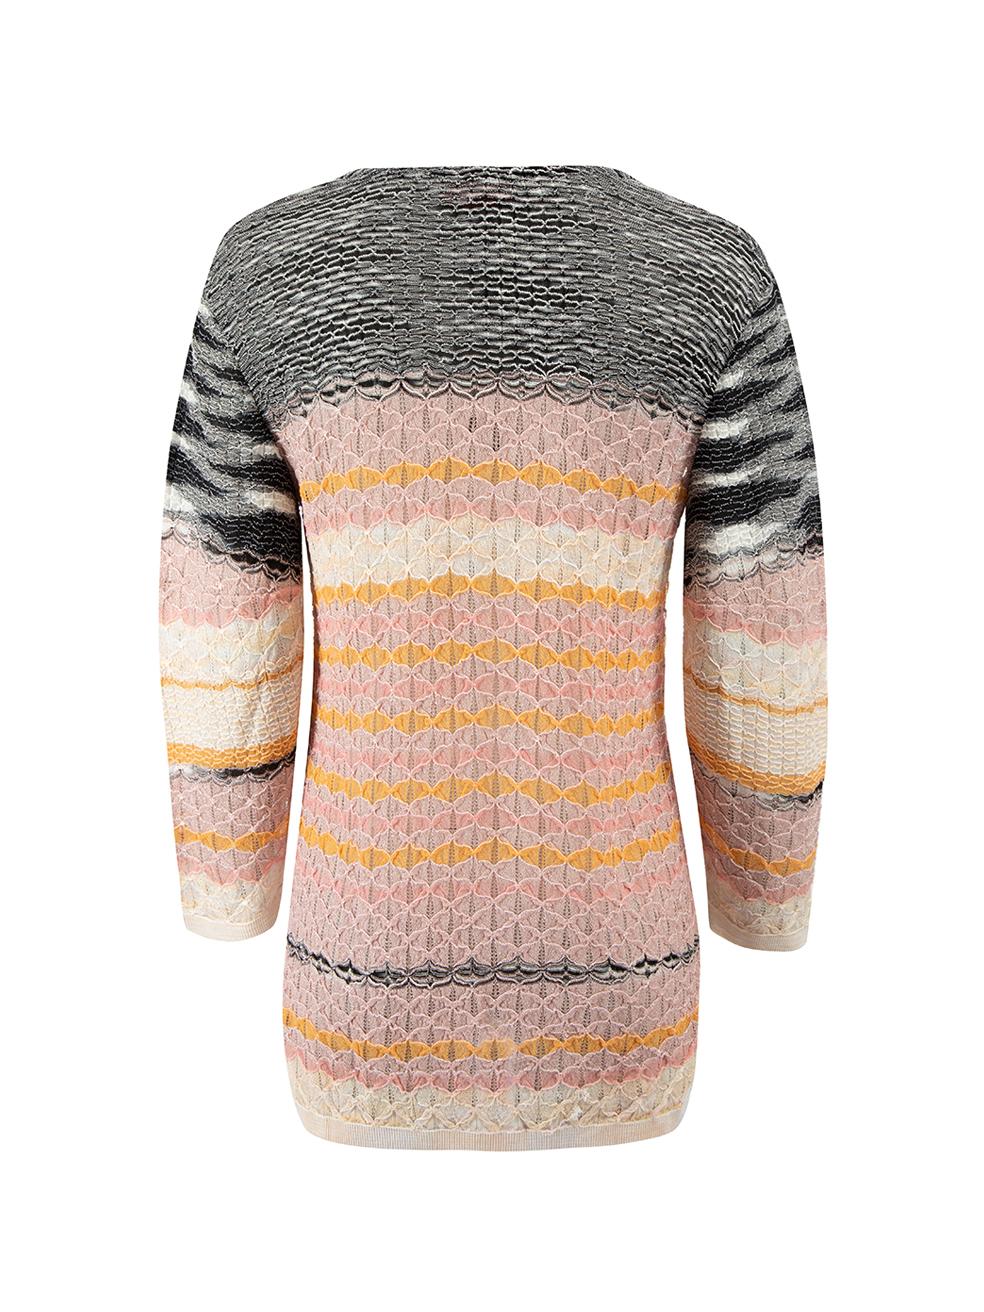 Pre-Loved Missoni Women's Pink Black & Orange Patterned Long Top In Excellent Condition For Sale In London, GB